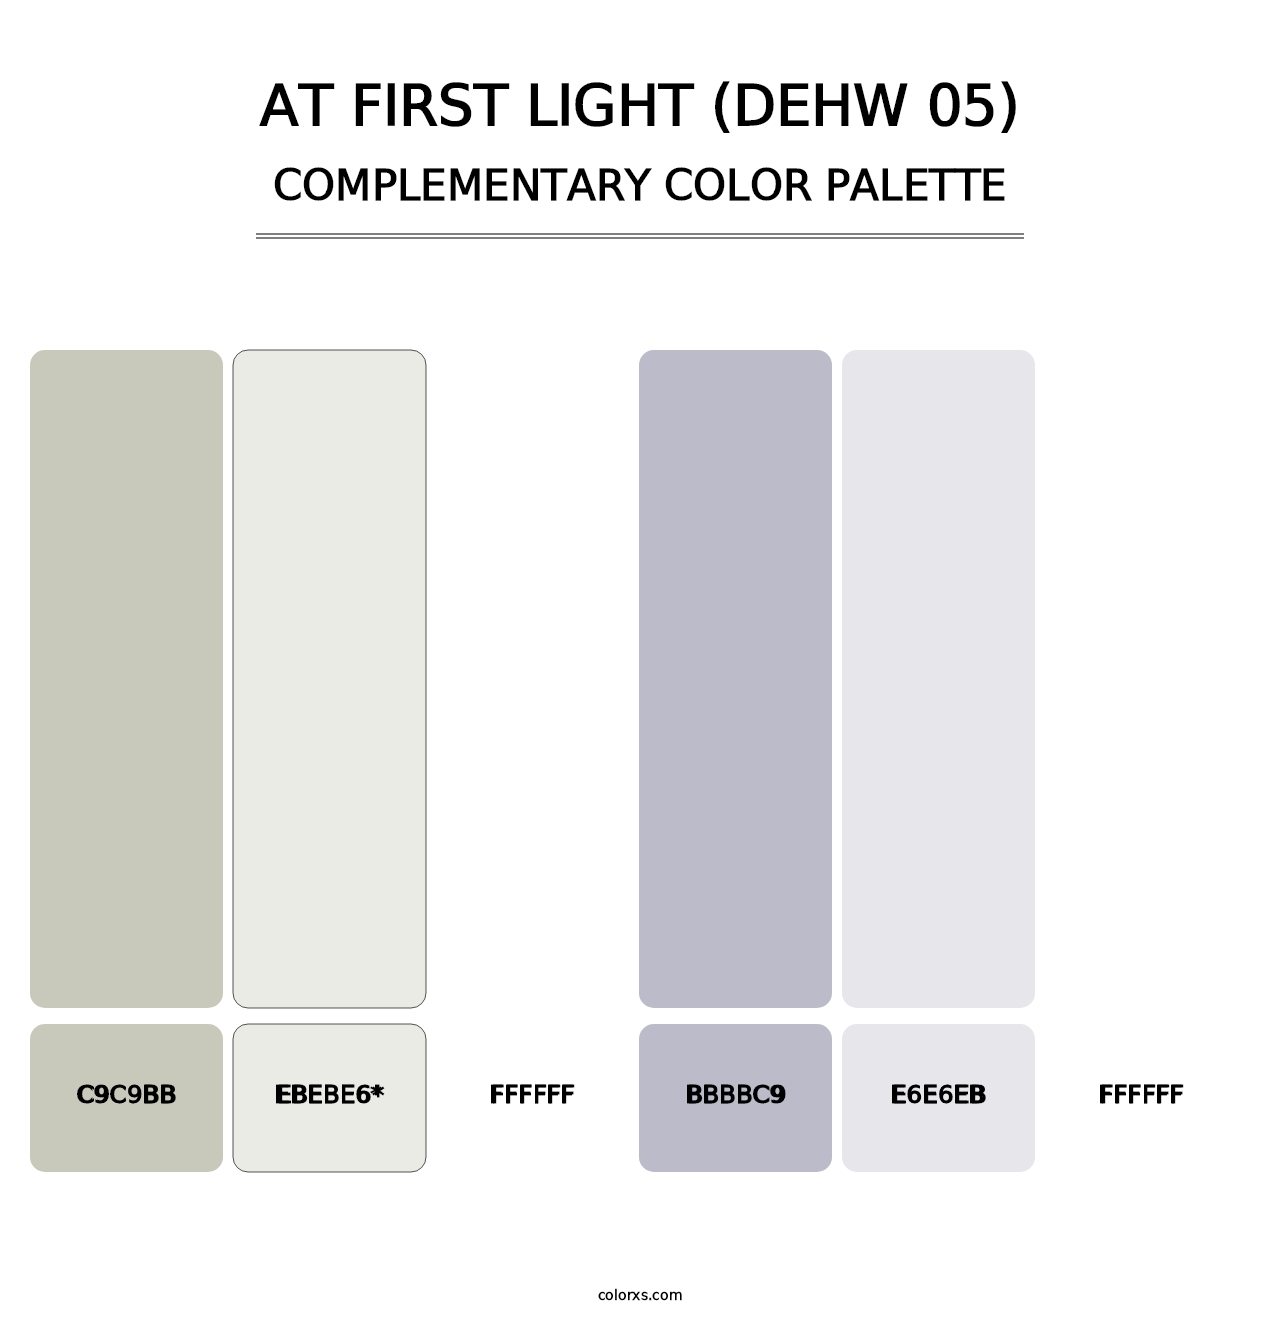 At First Light (DEHW 05) - Complementary Color Palette